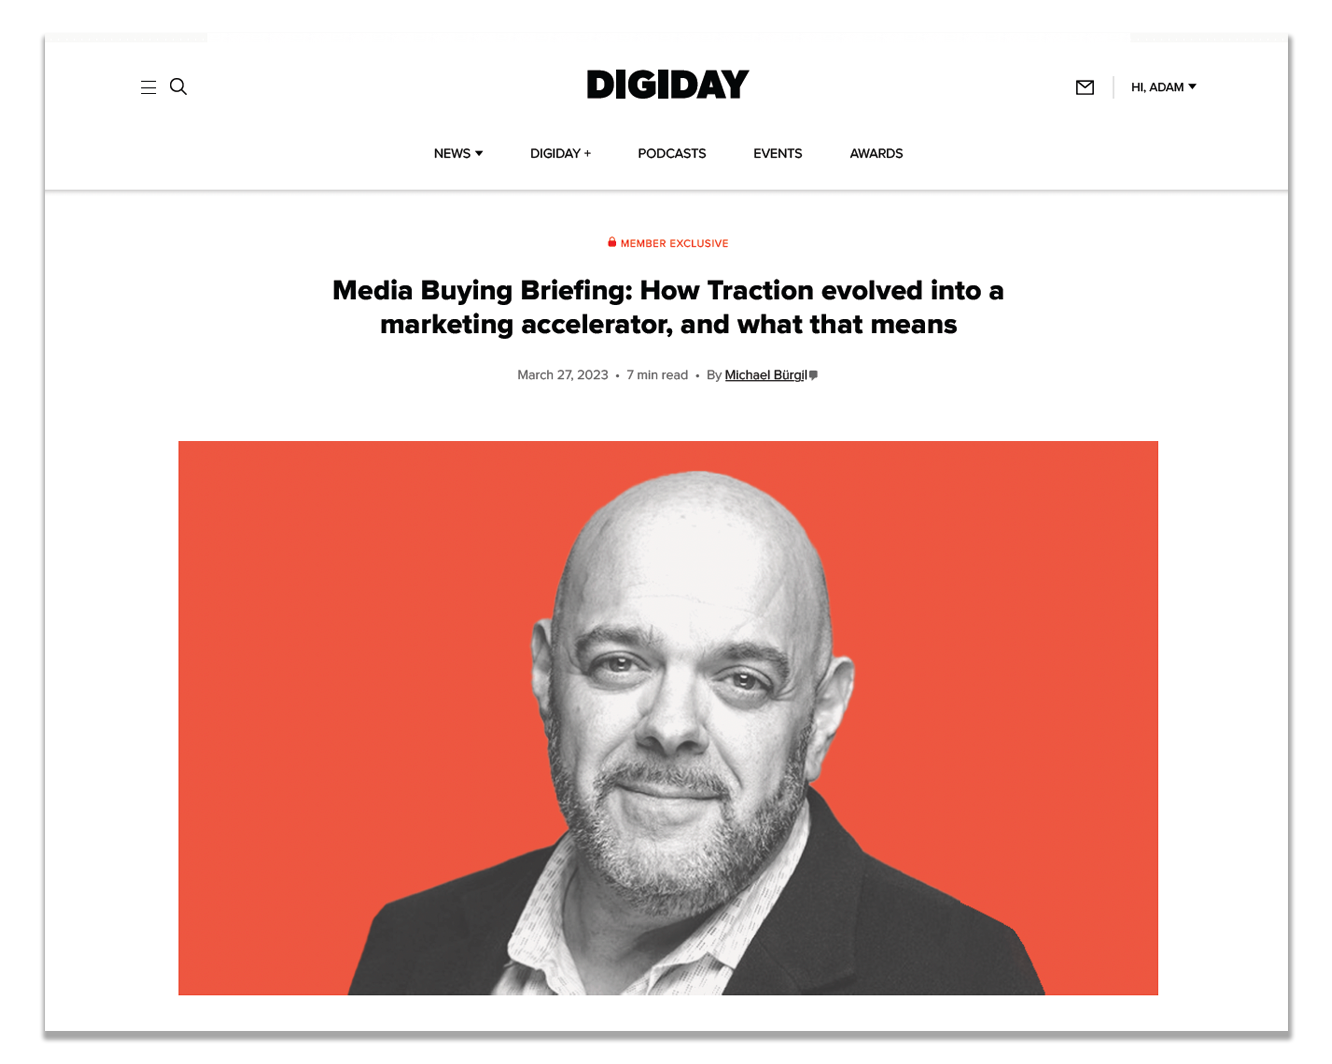 Adam Kleinberg on Digiday: How Traction Evolved in a Marketing Accelerator